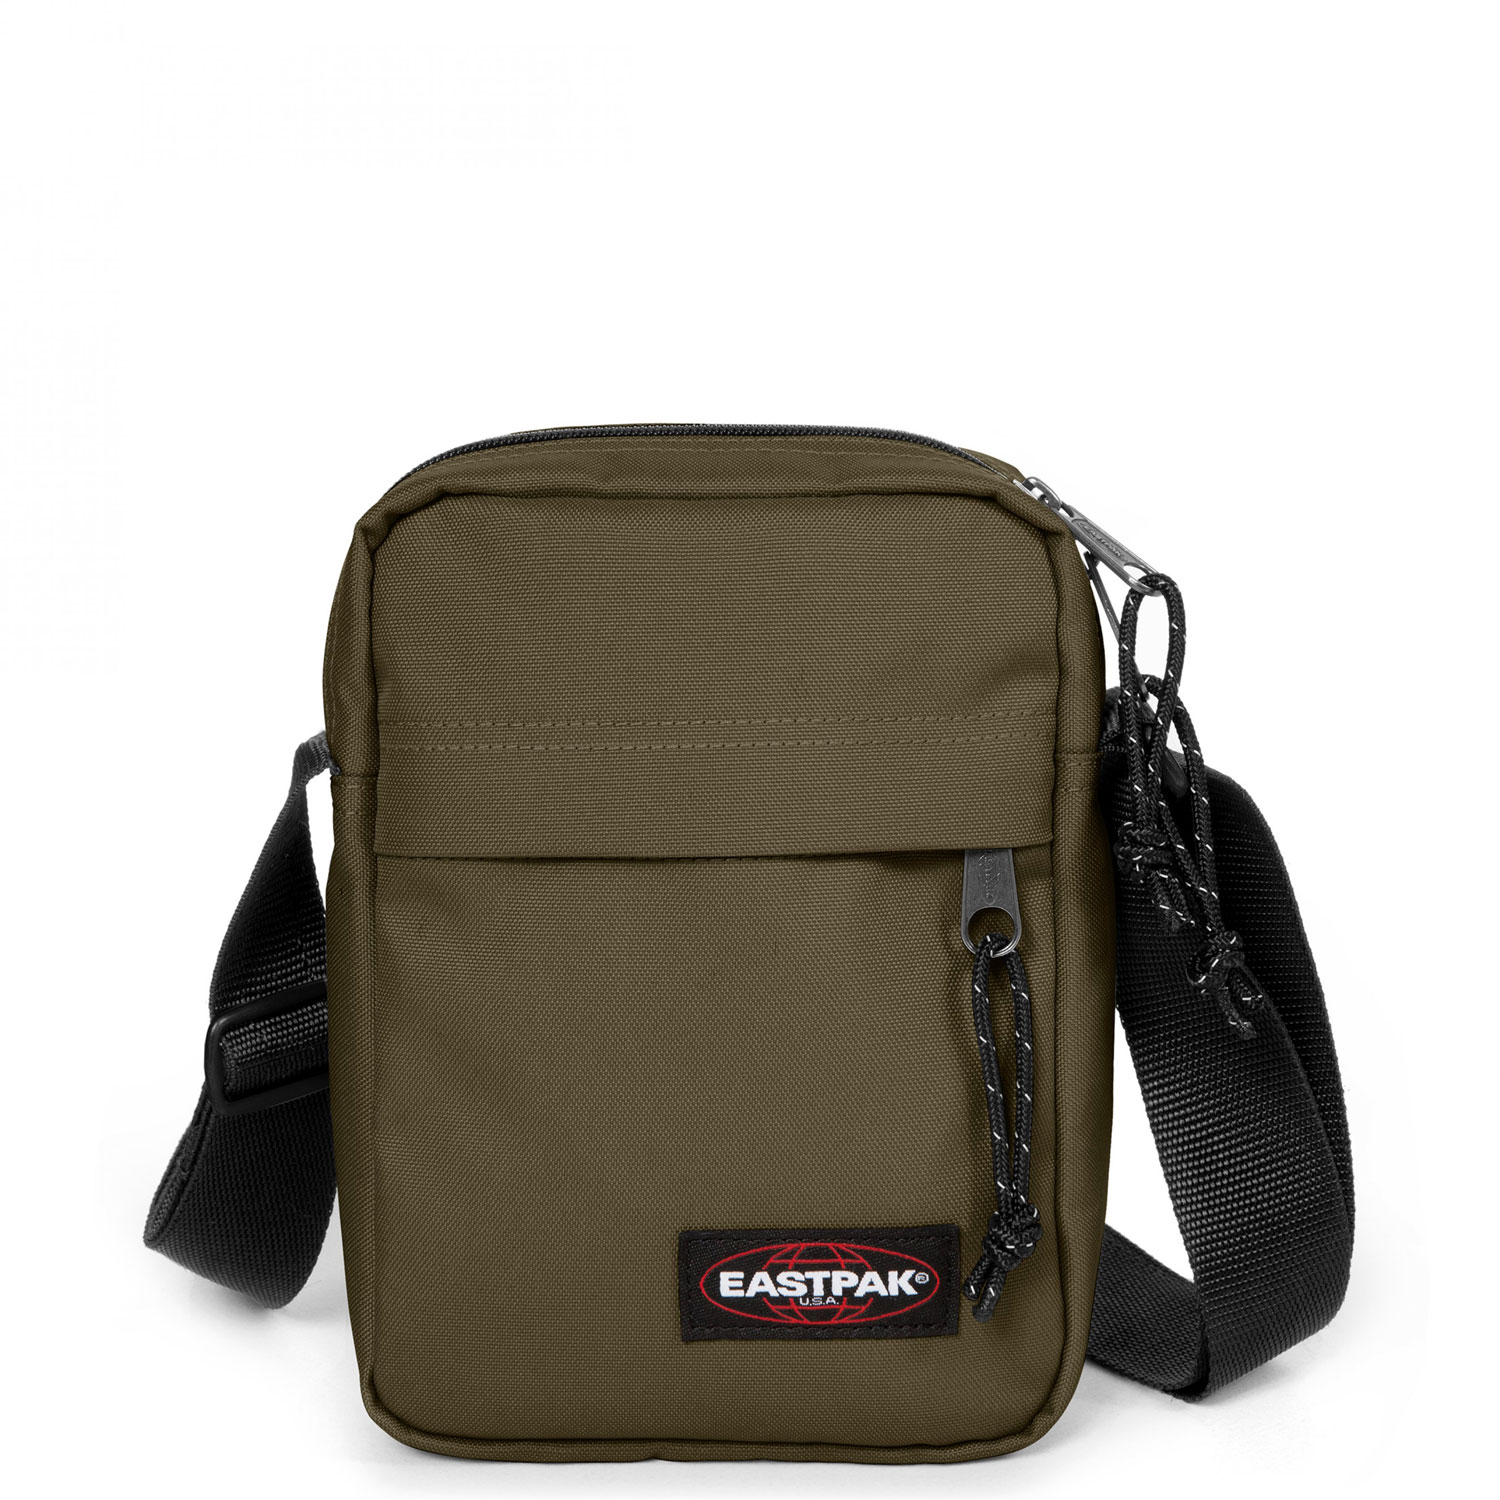 Eastpak Umhängetasche The One army olive